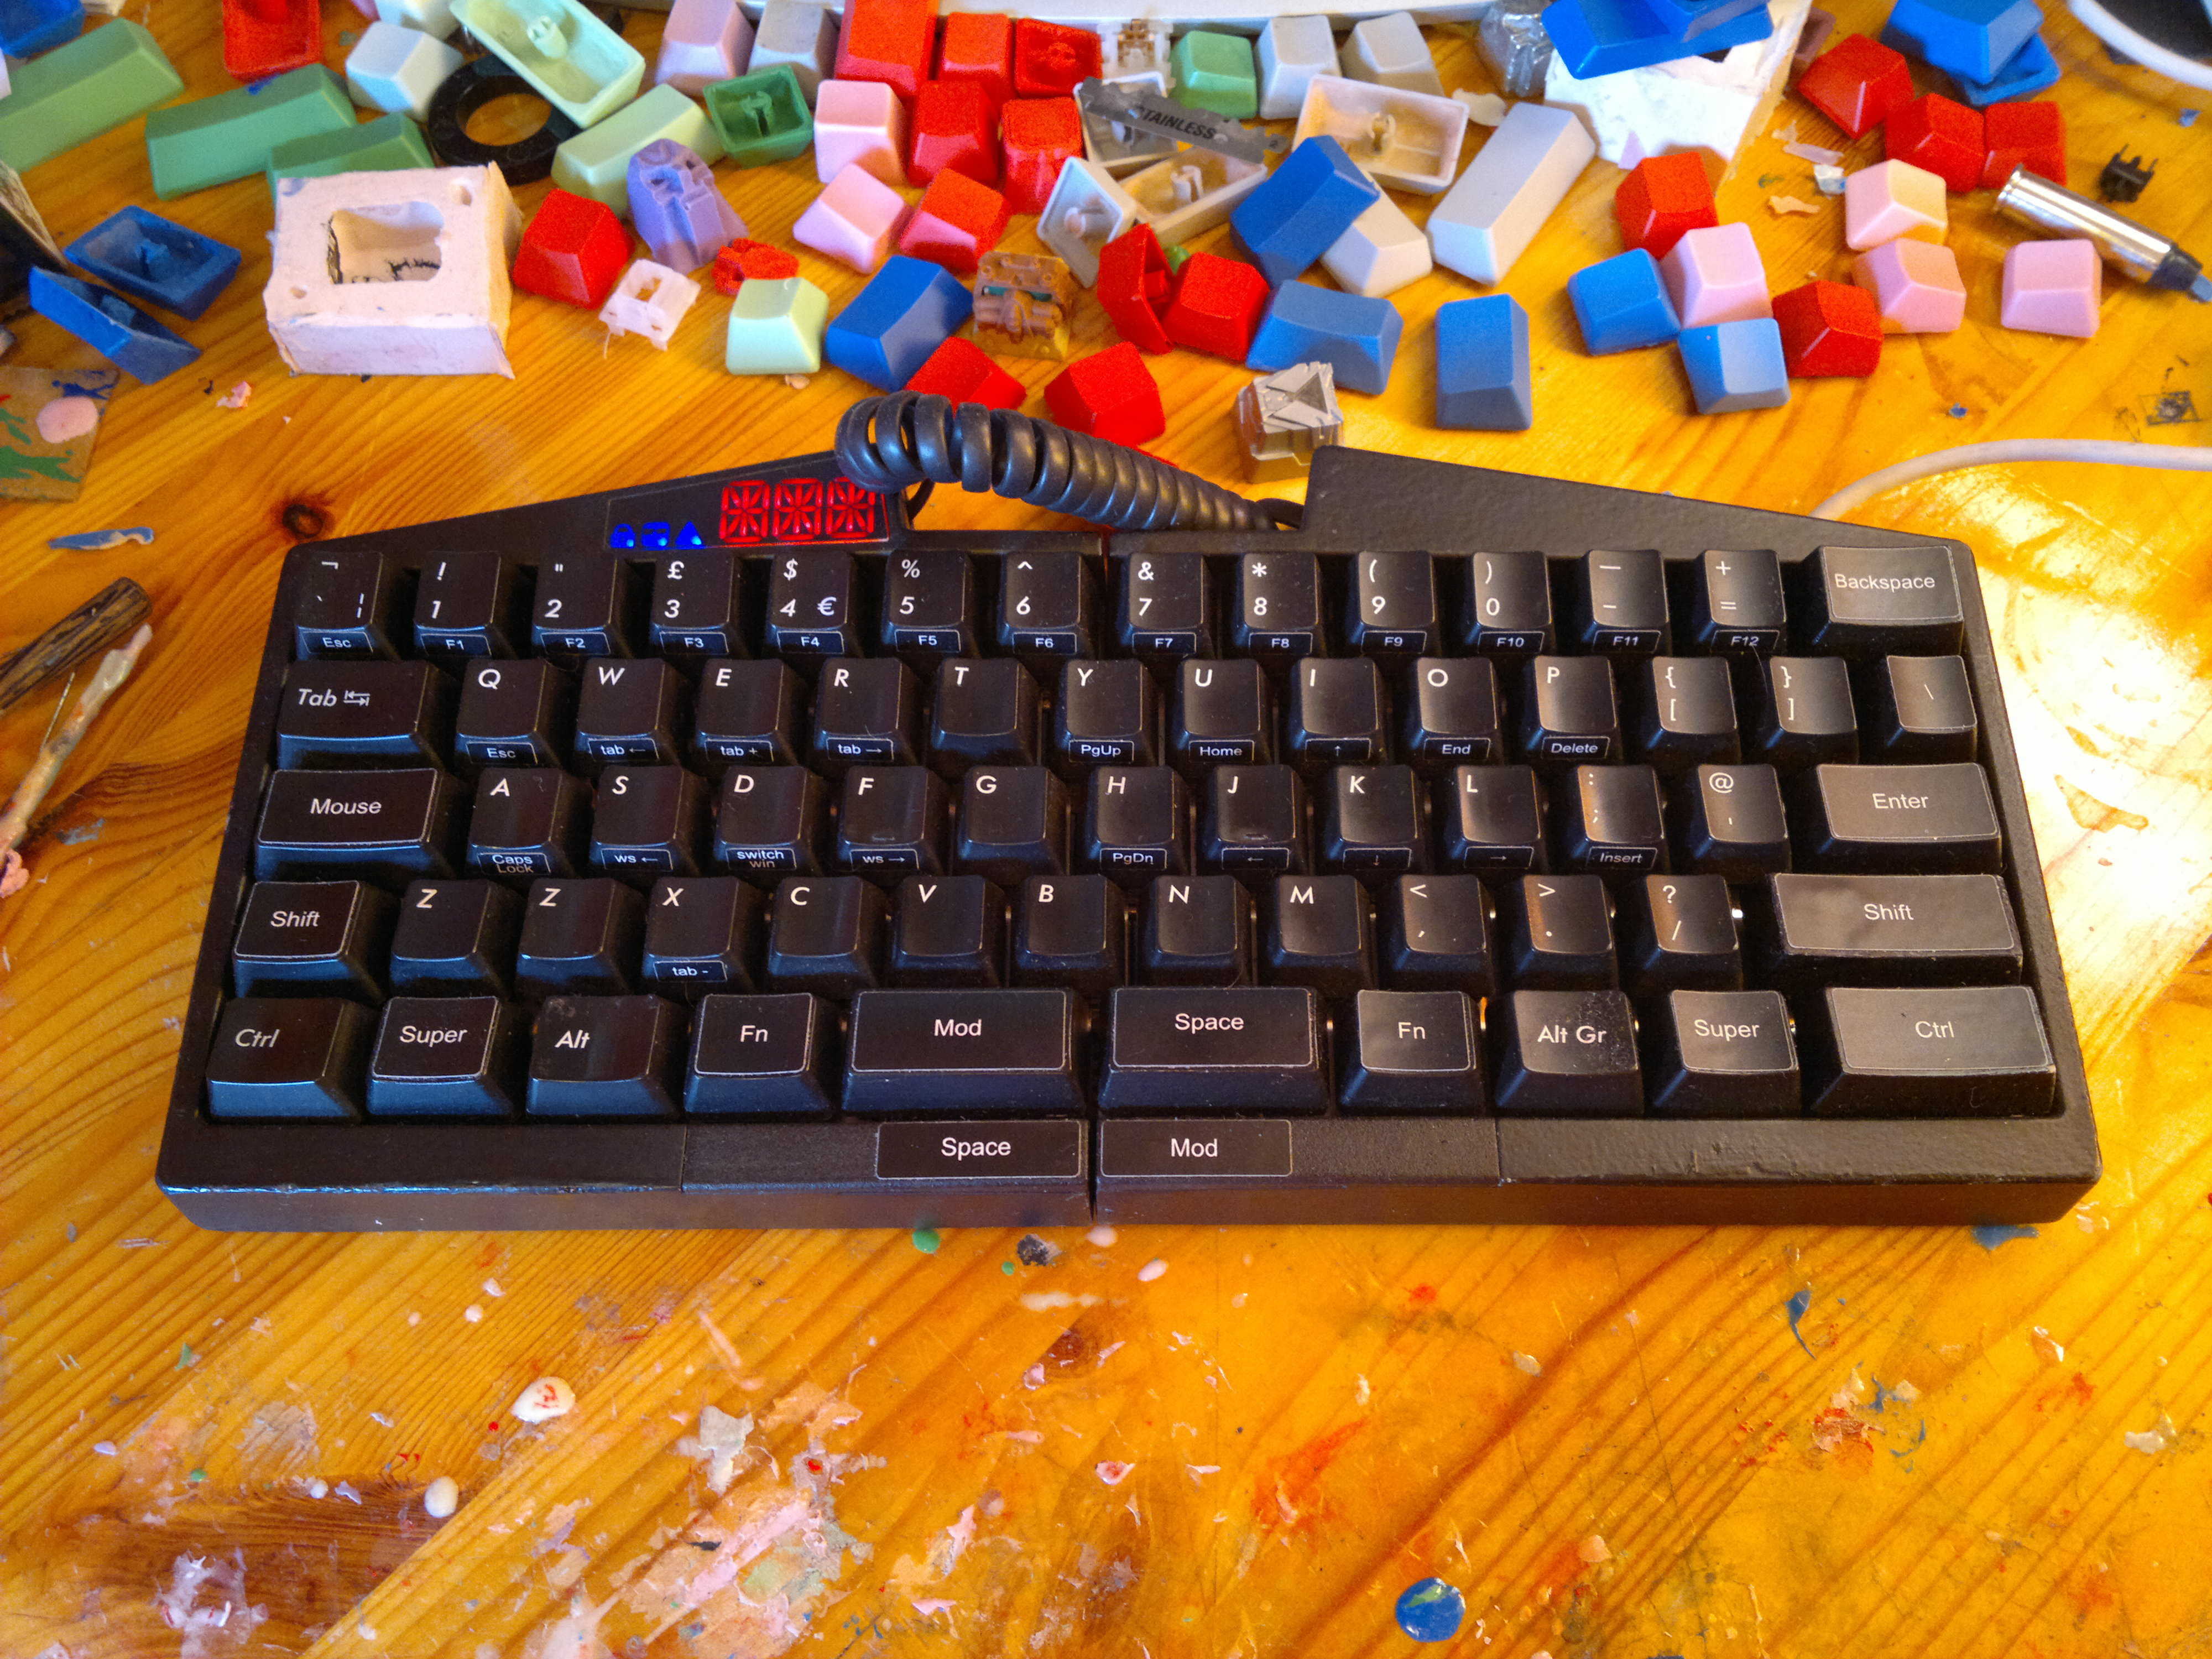 Ultimate Hacking Keyboard joined together